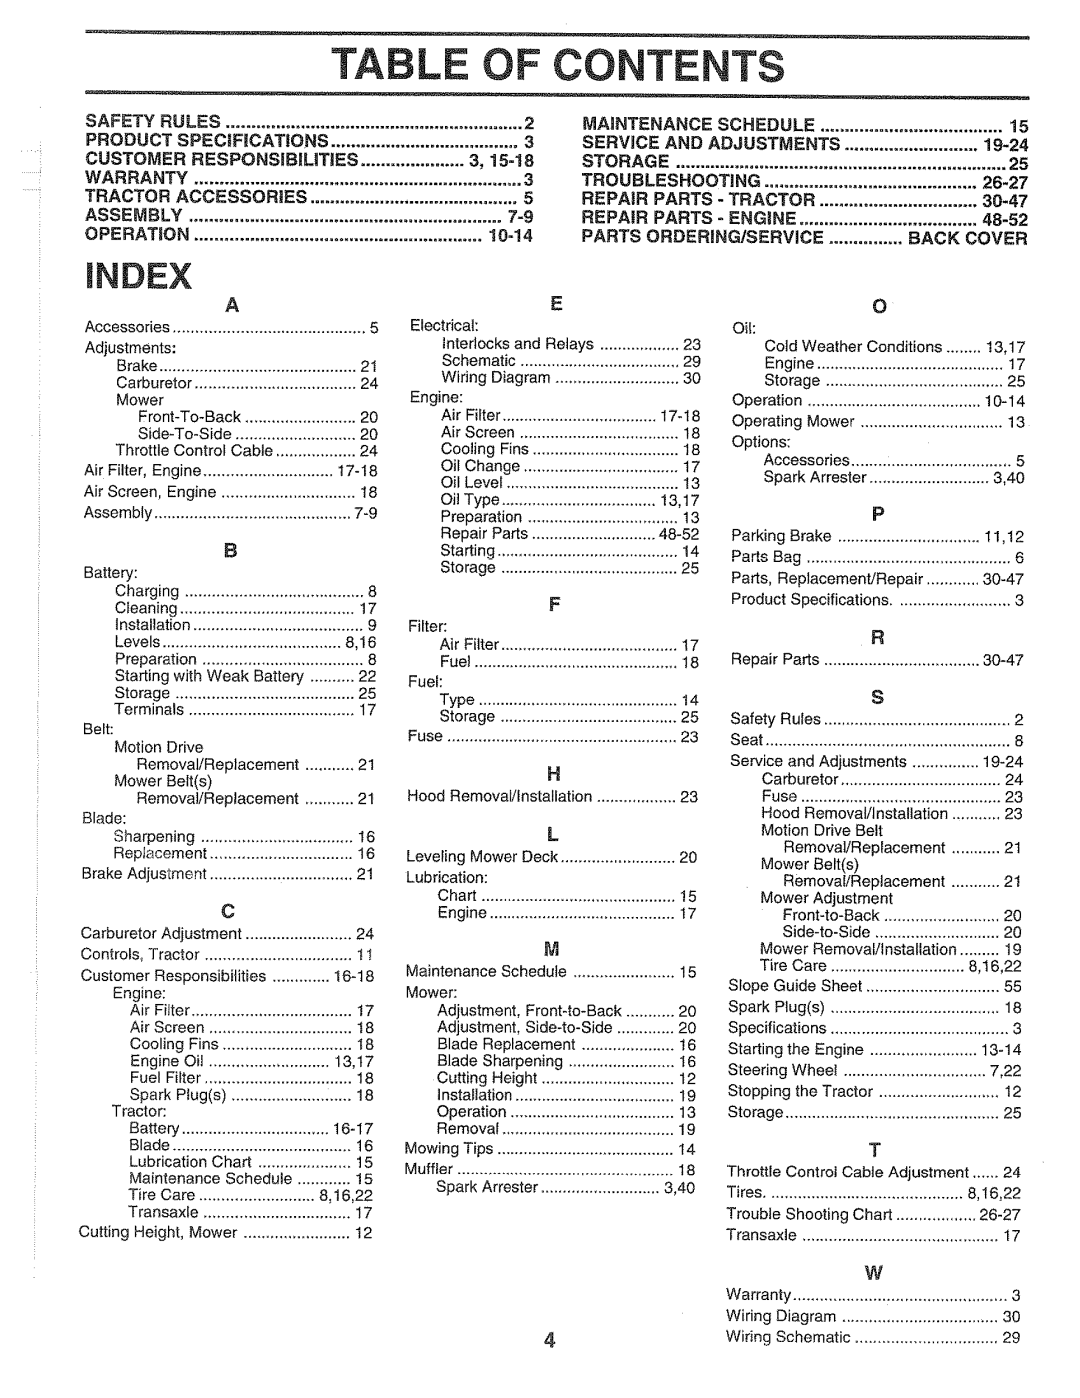 Sears 917.2565 manual Table, Of Cont, Safety Rules, Maintenance, Product, Specif_Cations, 19-24, Customer, RESPONSiBILiTiES 